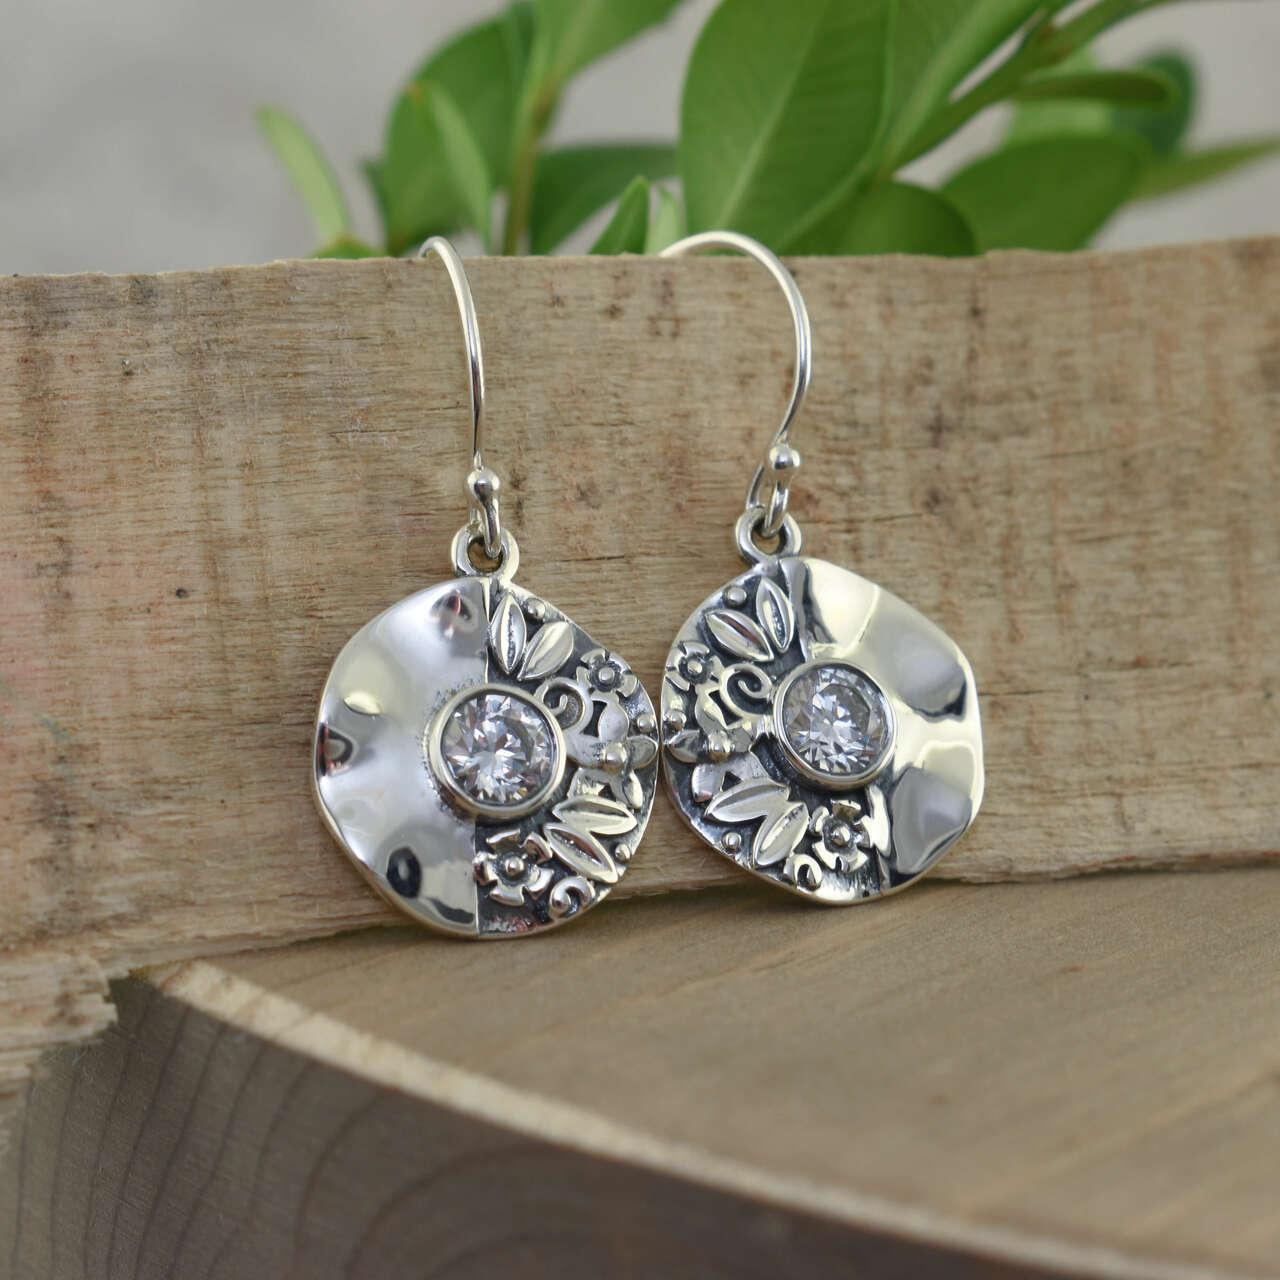 .925 sterling silver and CZ earrings on French wire hooks